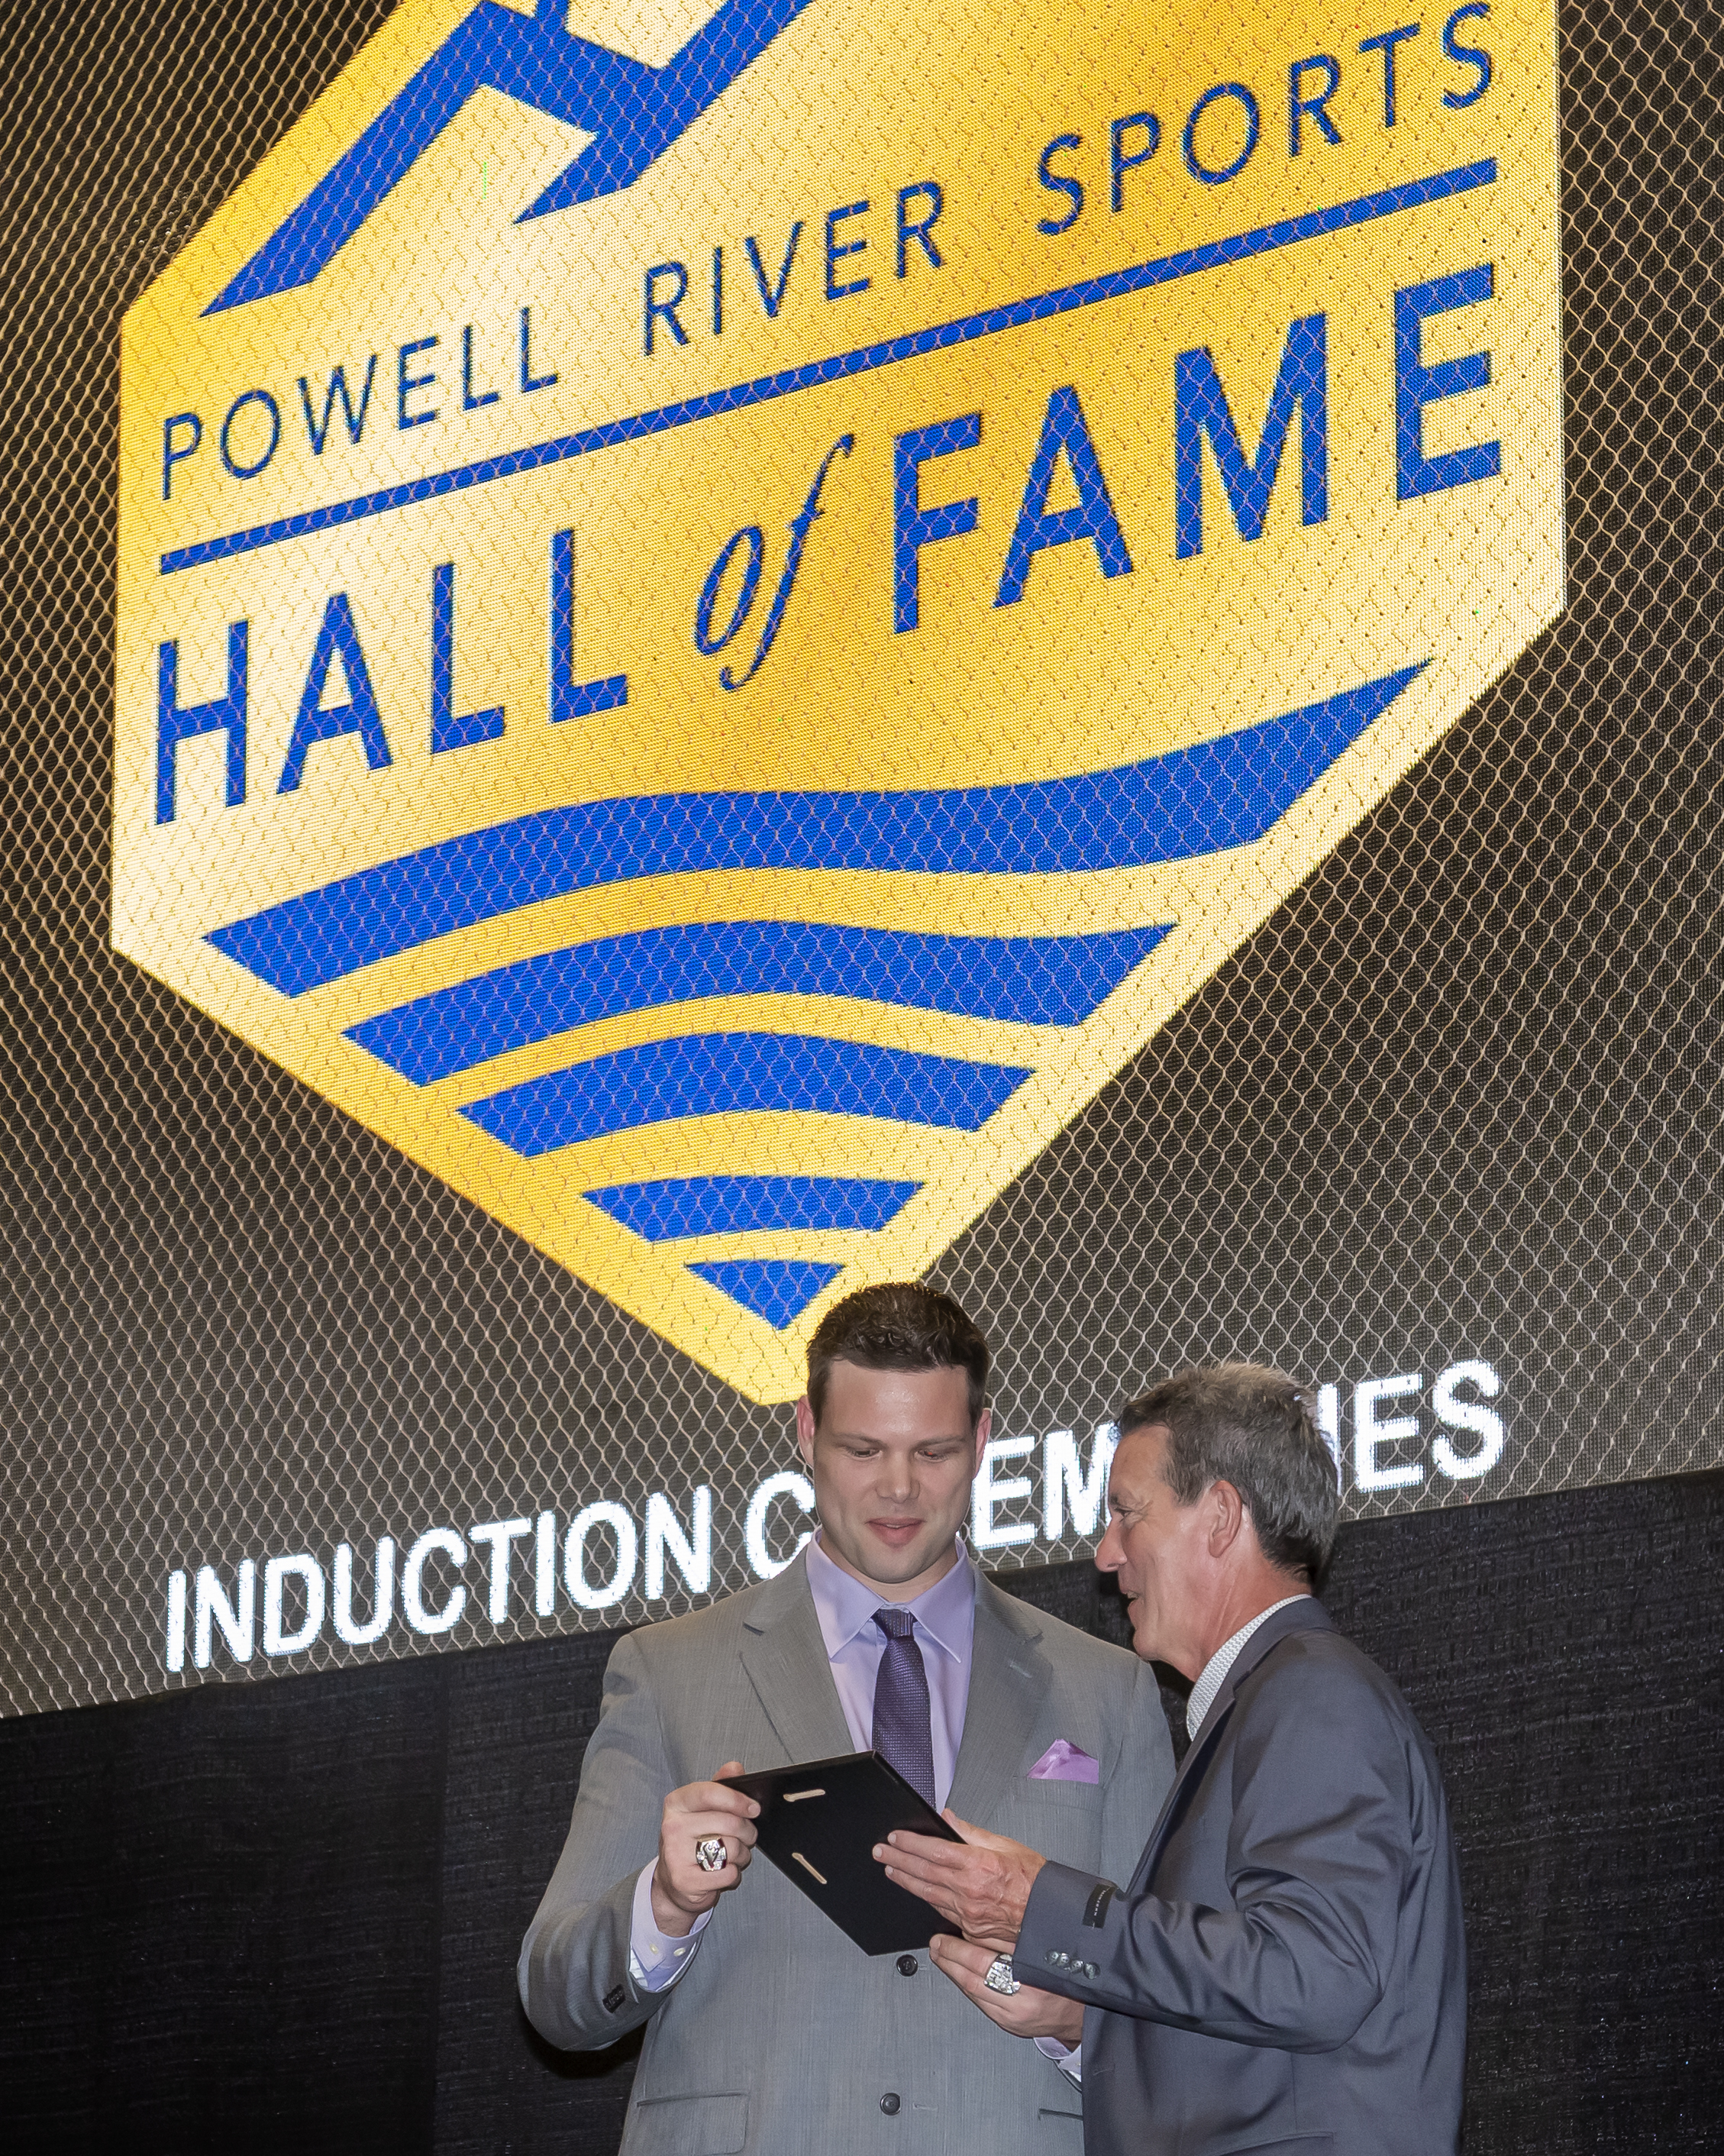 Local sports hall of fame welcomes former Powell River King